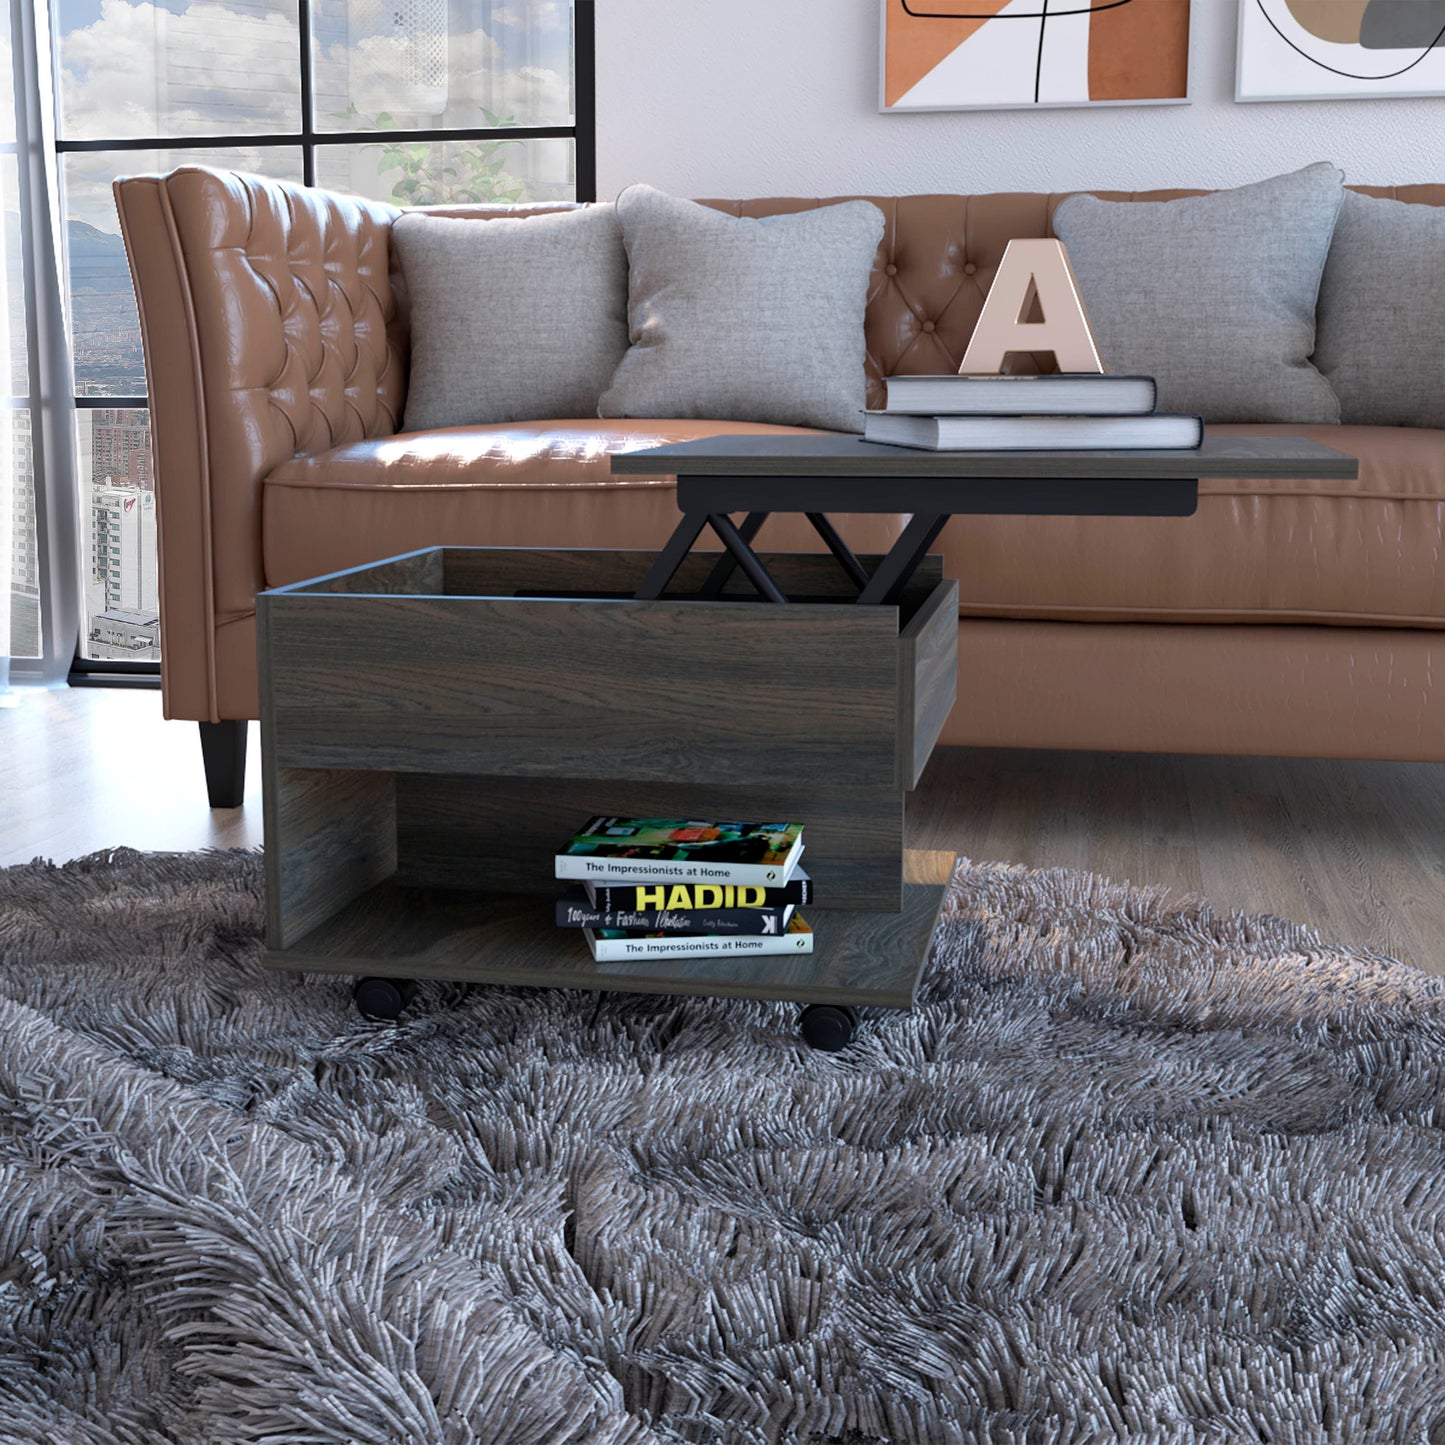 Mercuri Lift Top Coffee Table with Storage, Casters, Carbon Espresso Finish